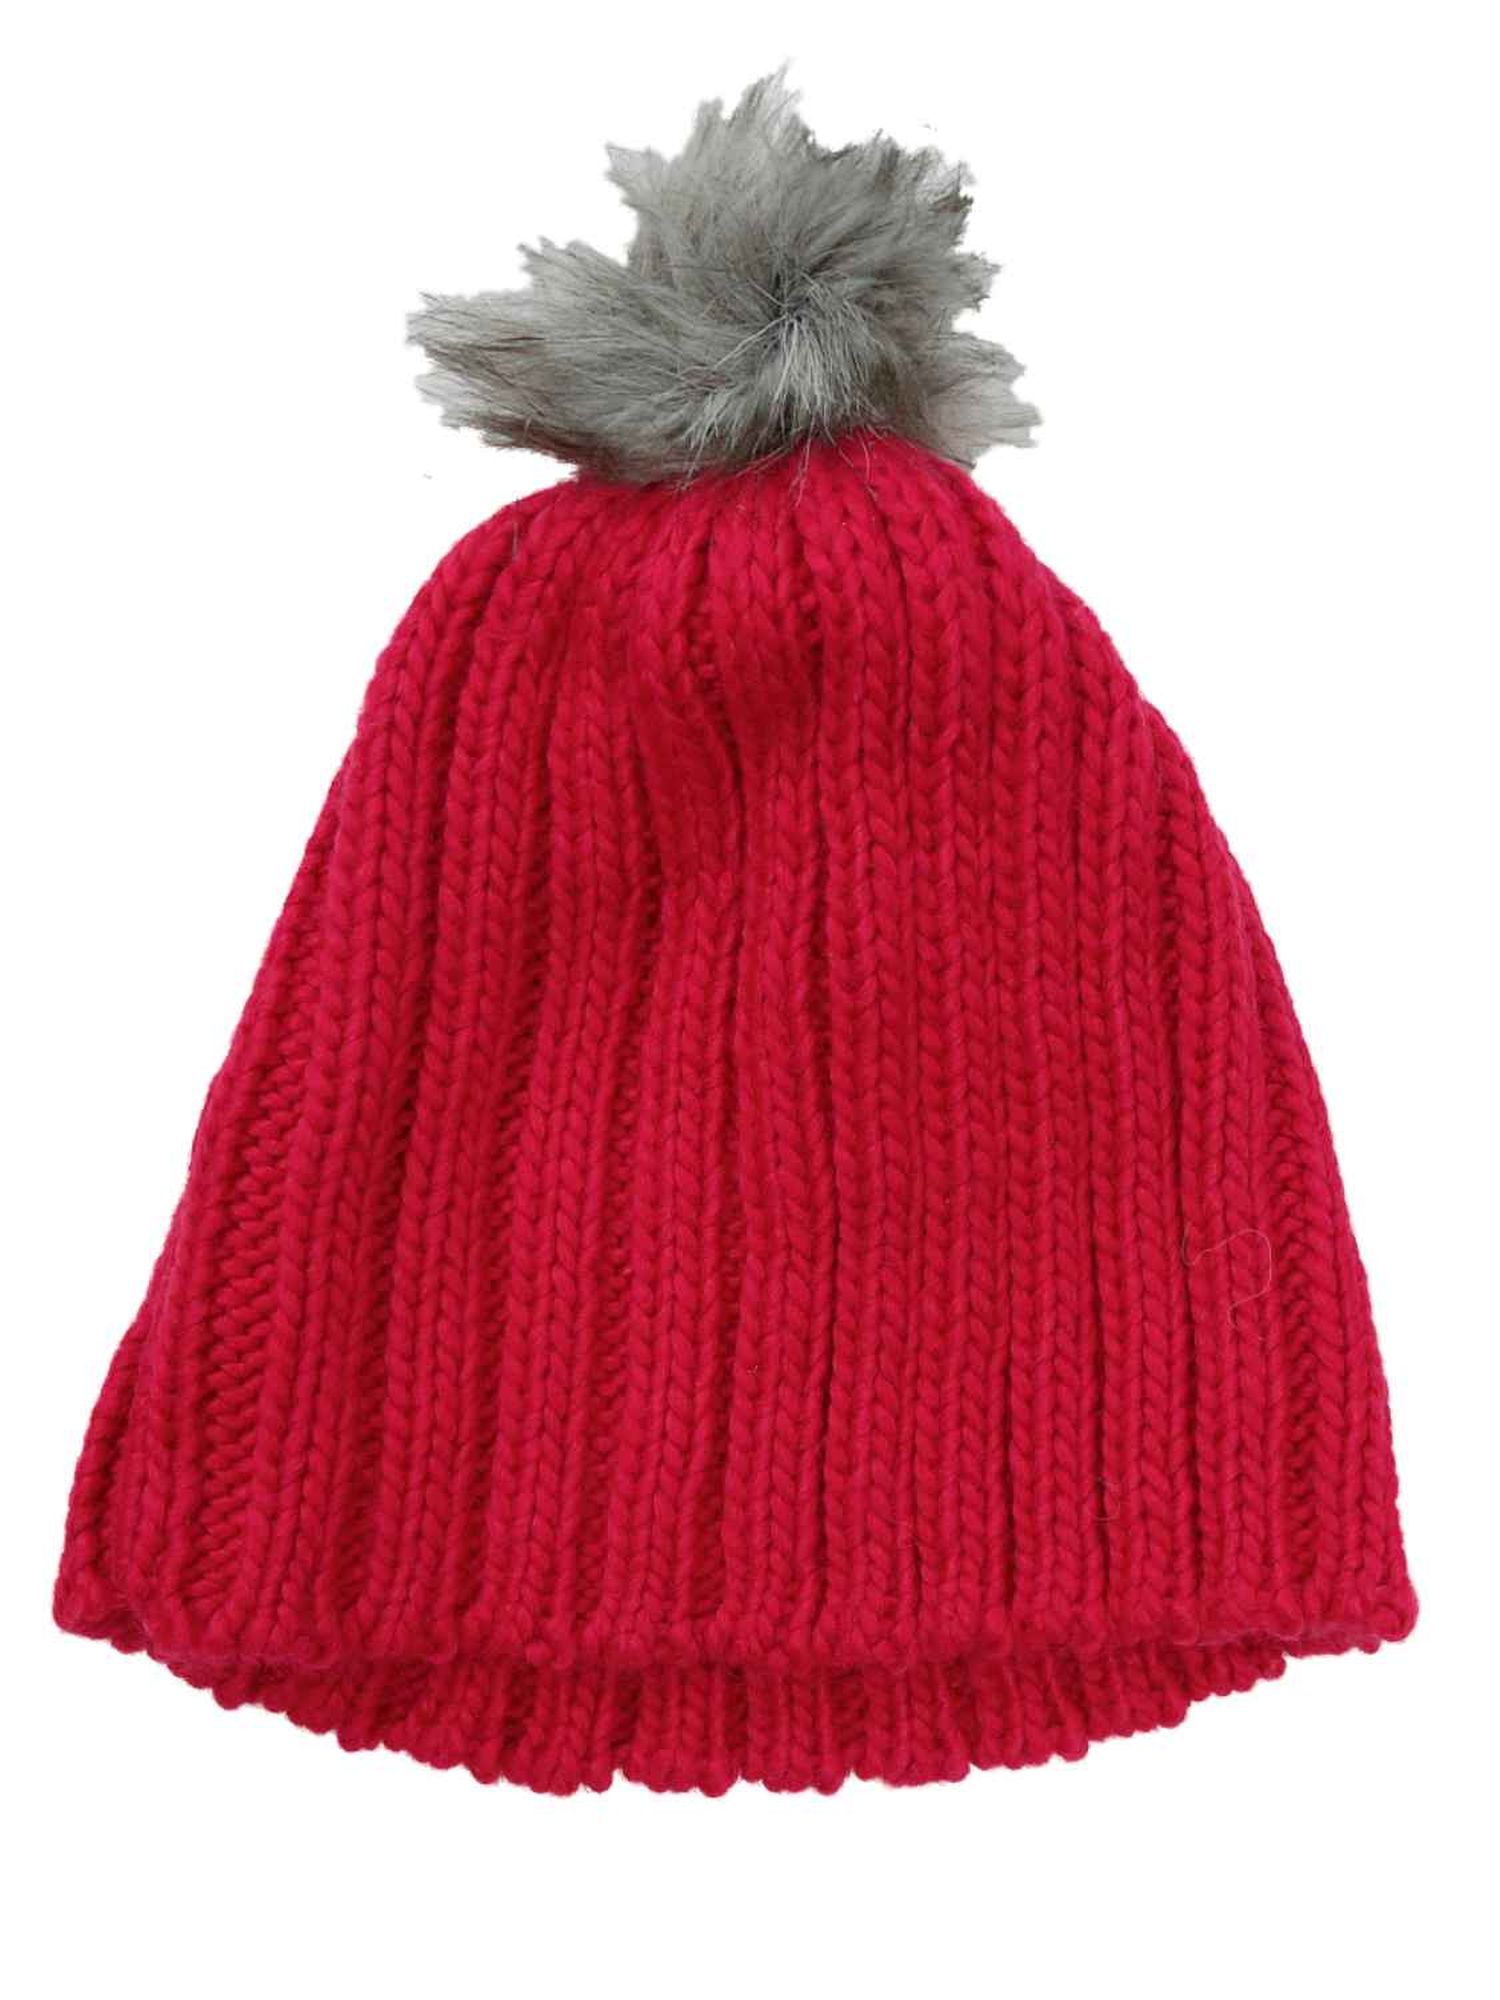 Urbanology Womens Chunky Pink Knit Beanie Winter Hat with Faux Fur Pom Pom - image 1 of 1